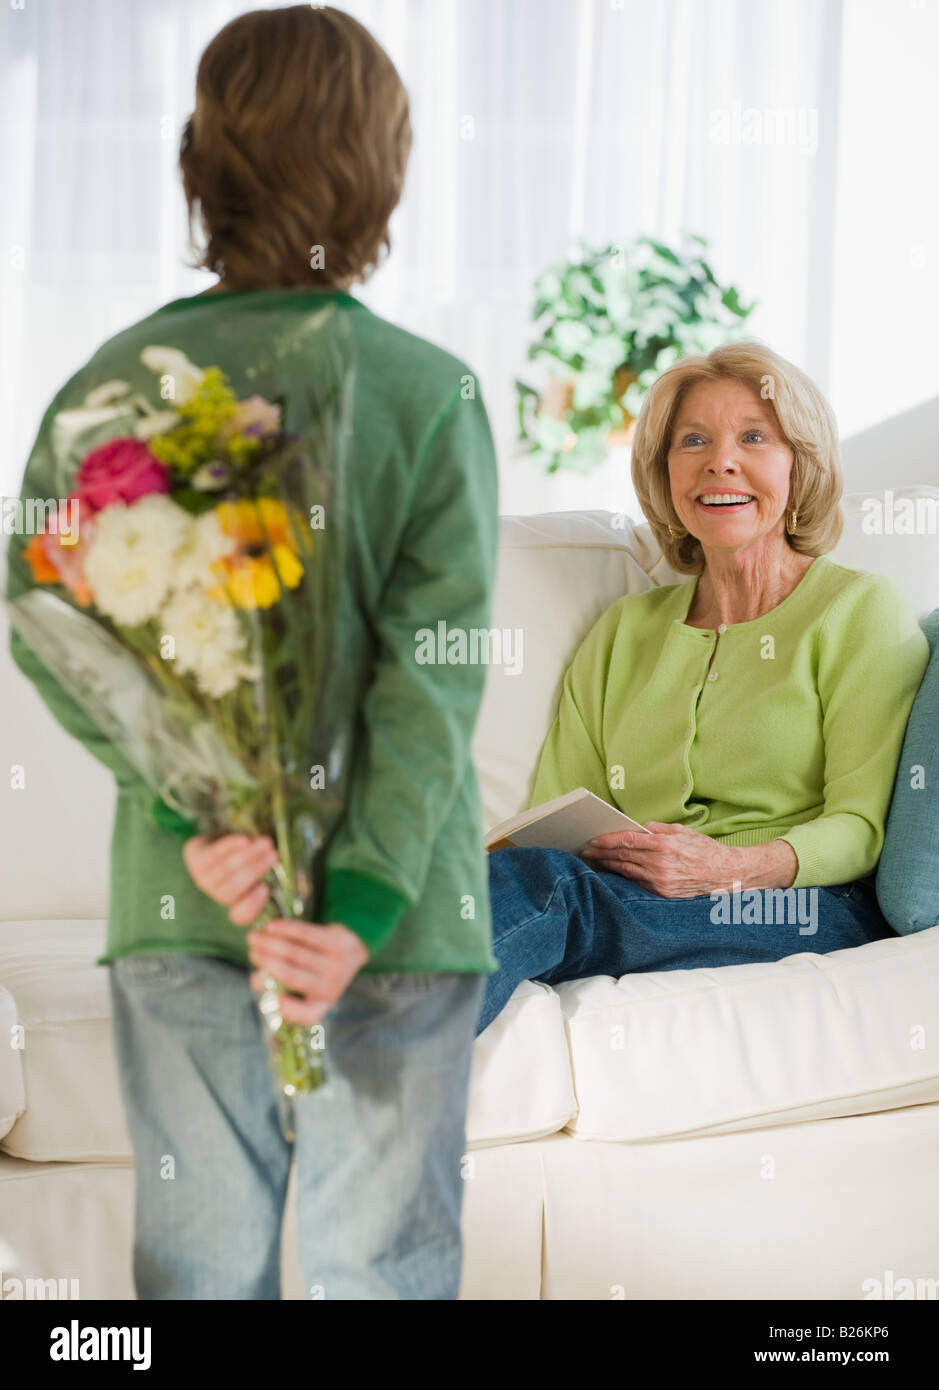 Grandson surprising grandmother with flowers Stock Photo